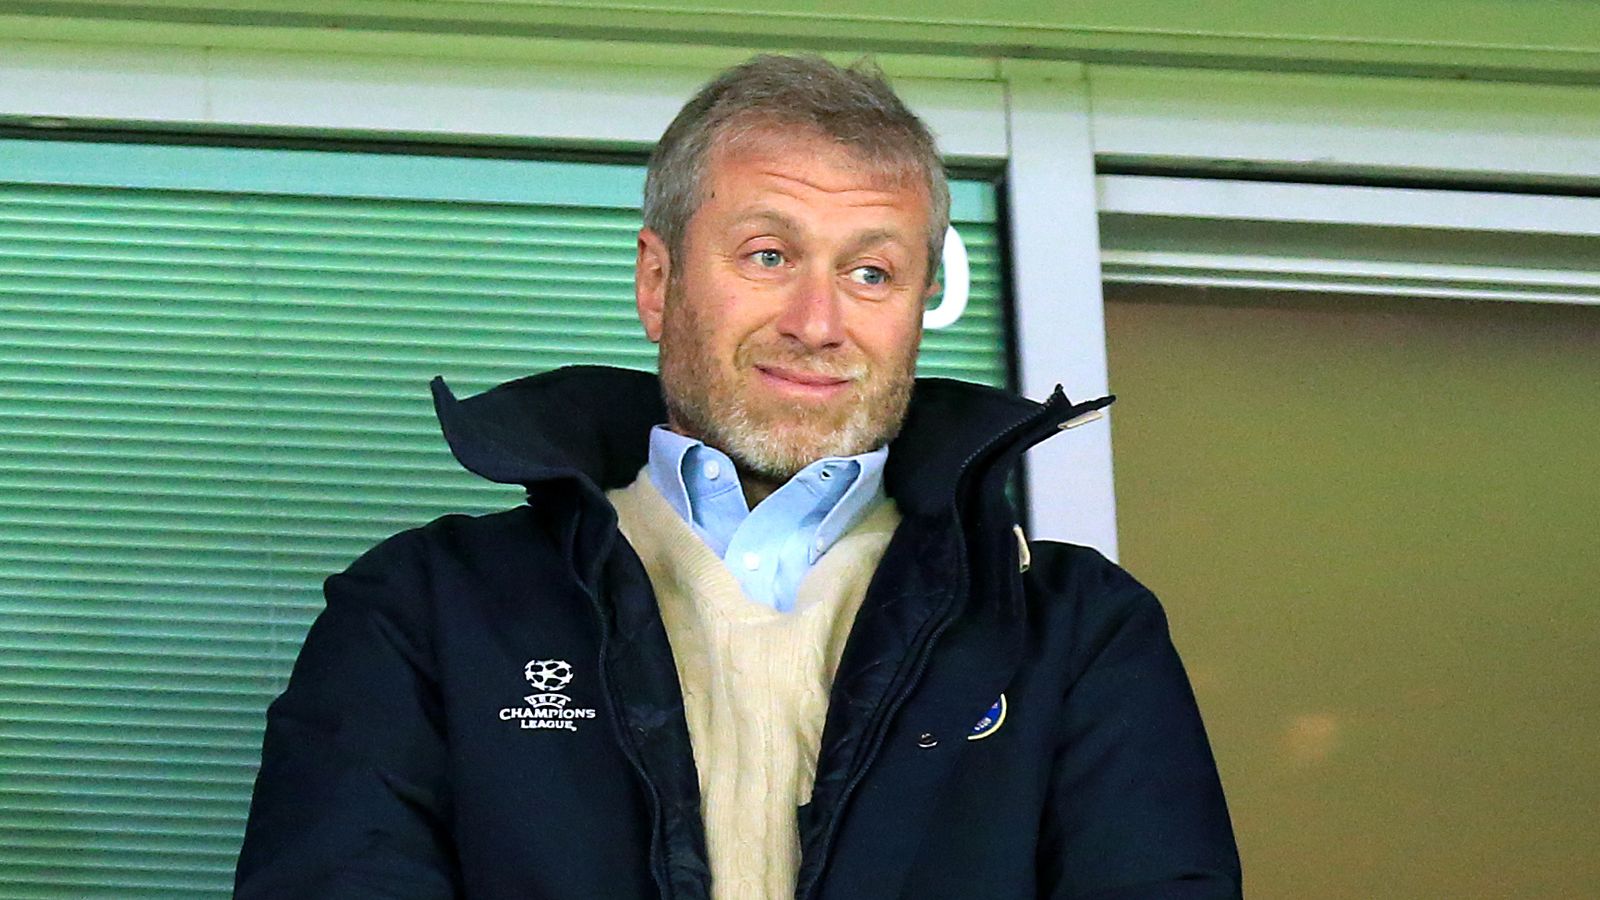 Chelsea owner Roman Abramovich 'trying to broker peace' between Russia & Ukraine..